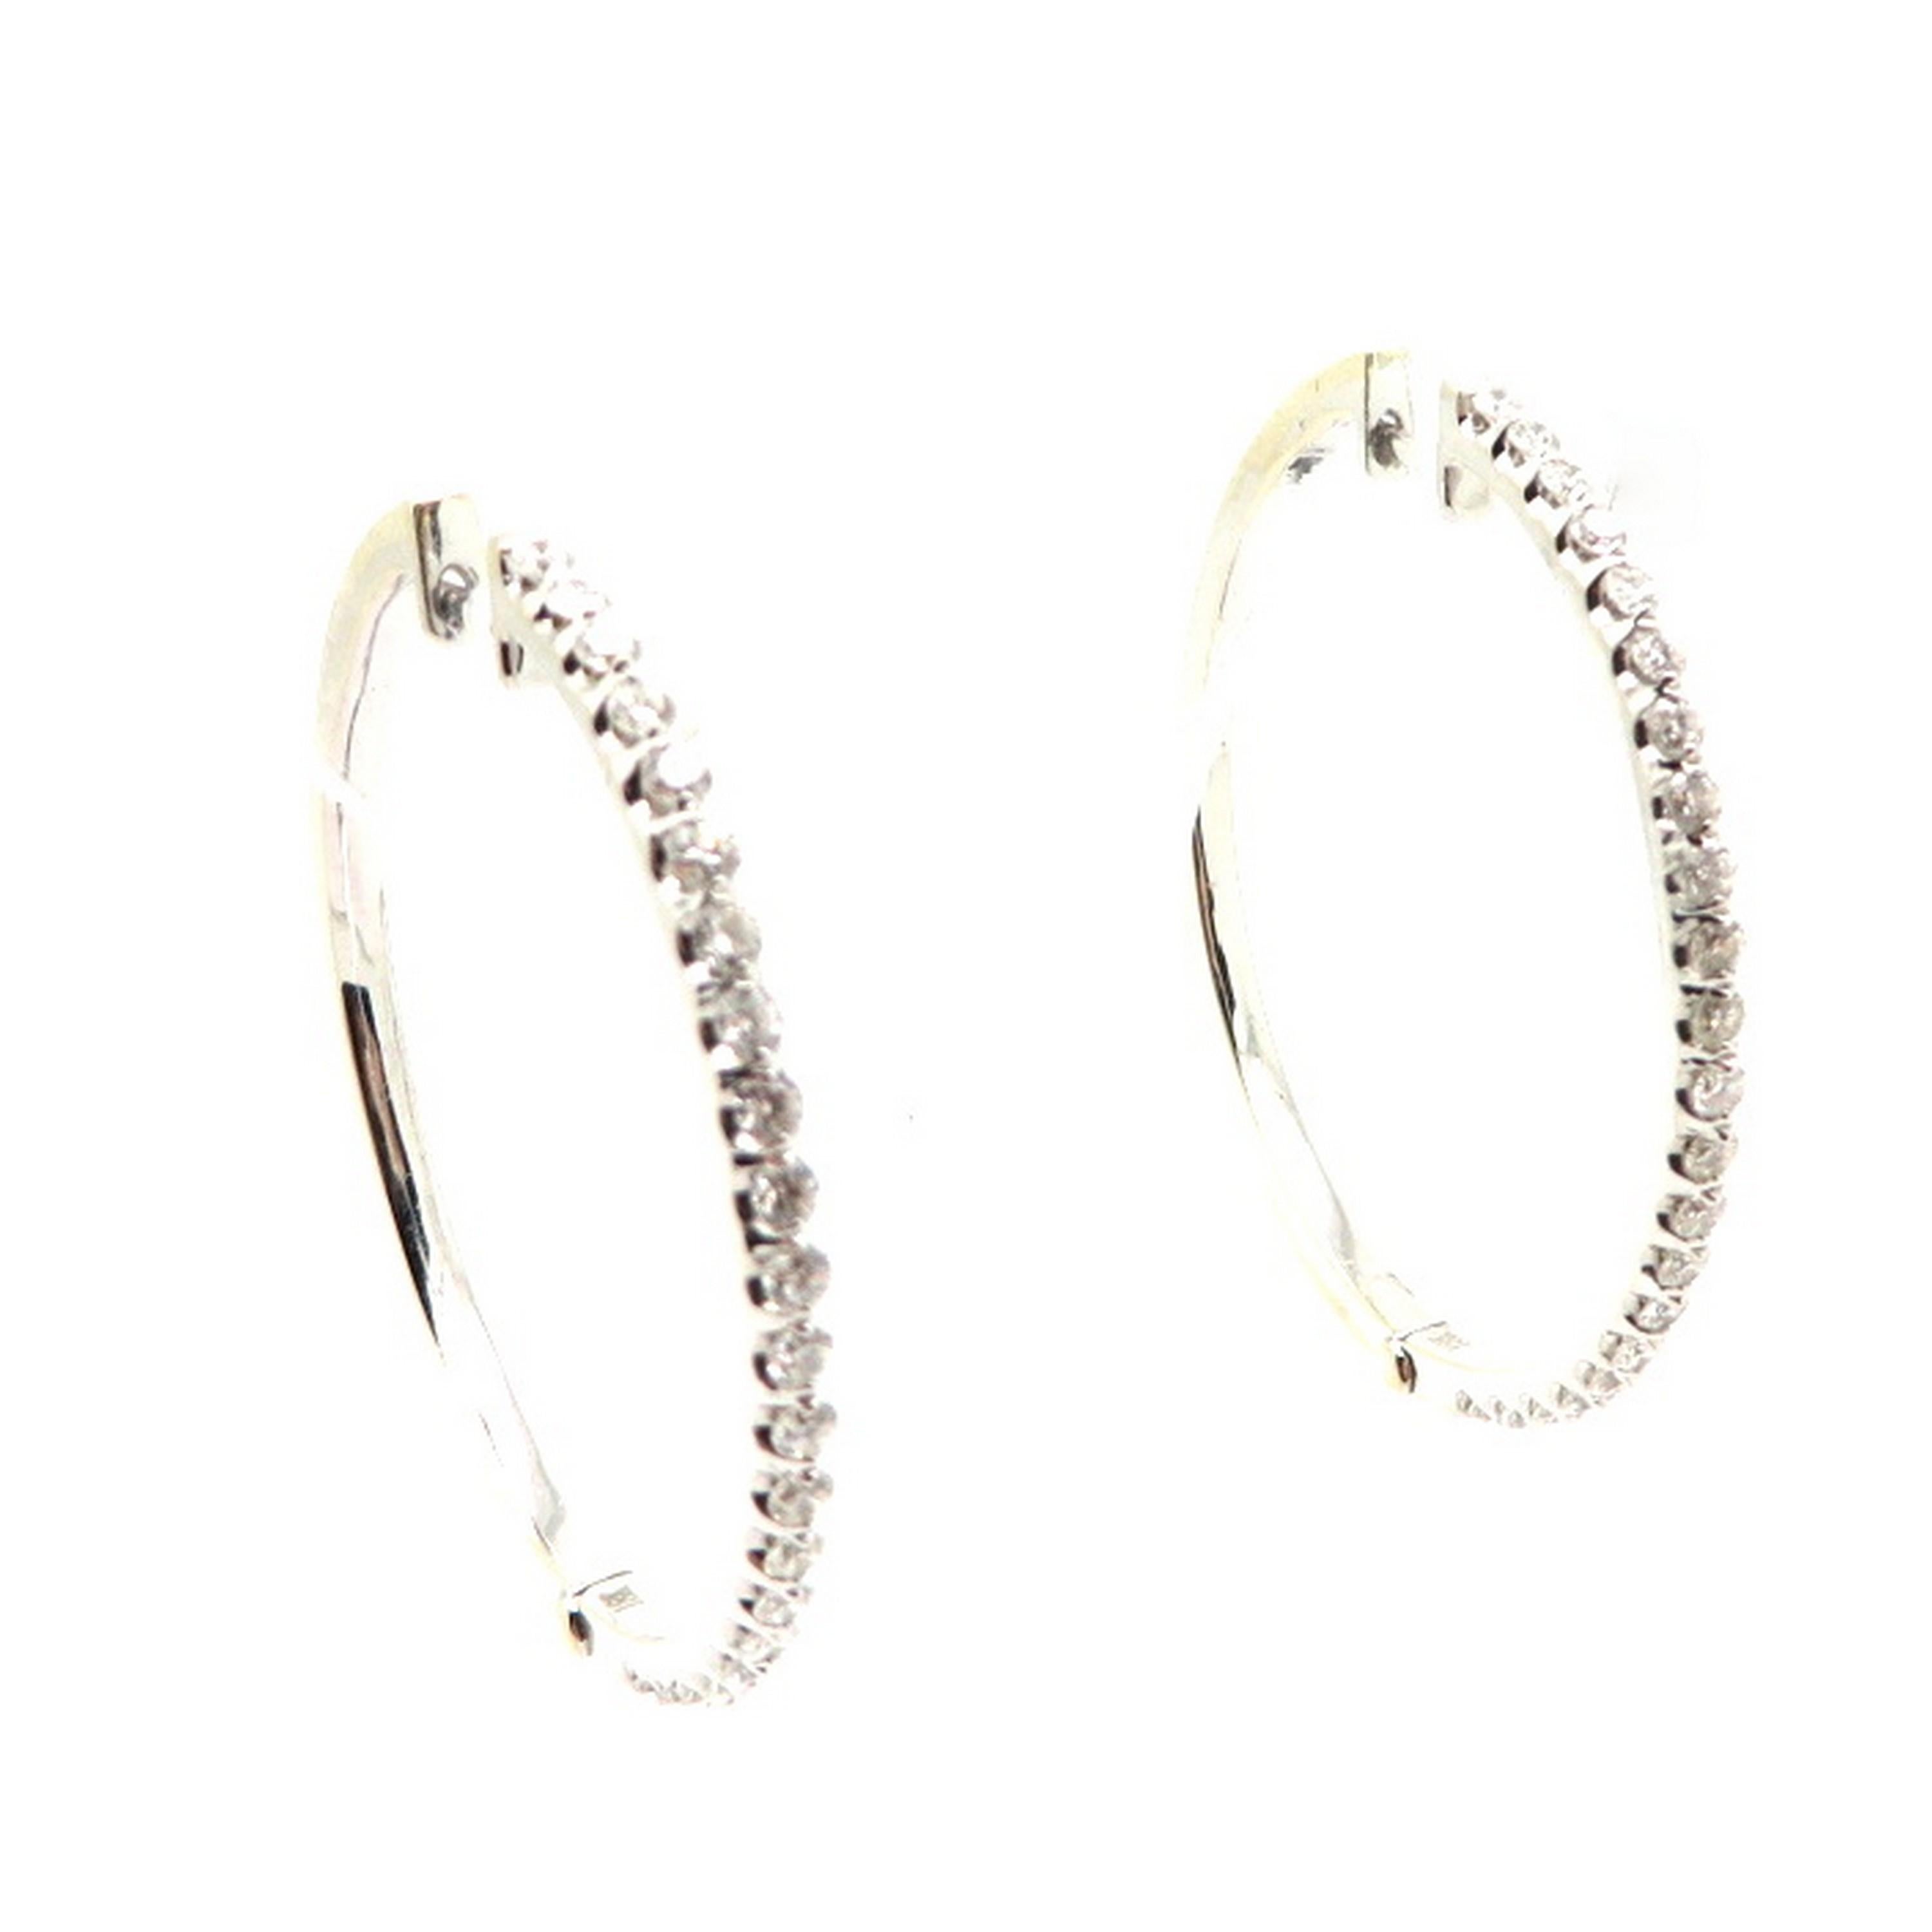 Estate 18K white gold round diamond hoop earrings. Showcasing 44 round brilliant cut prong set diamonds weighing a combined total of approximately 1.19 carats. Diamond grading: color grade: H – I. Clarity grade: SI1. Each earring measures 1-½”